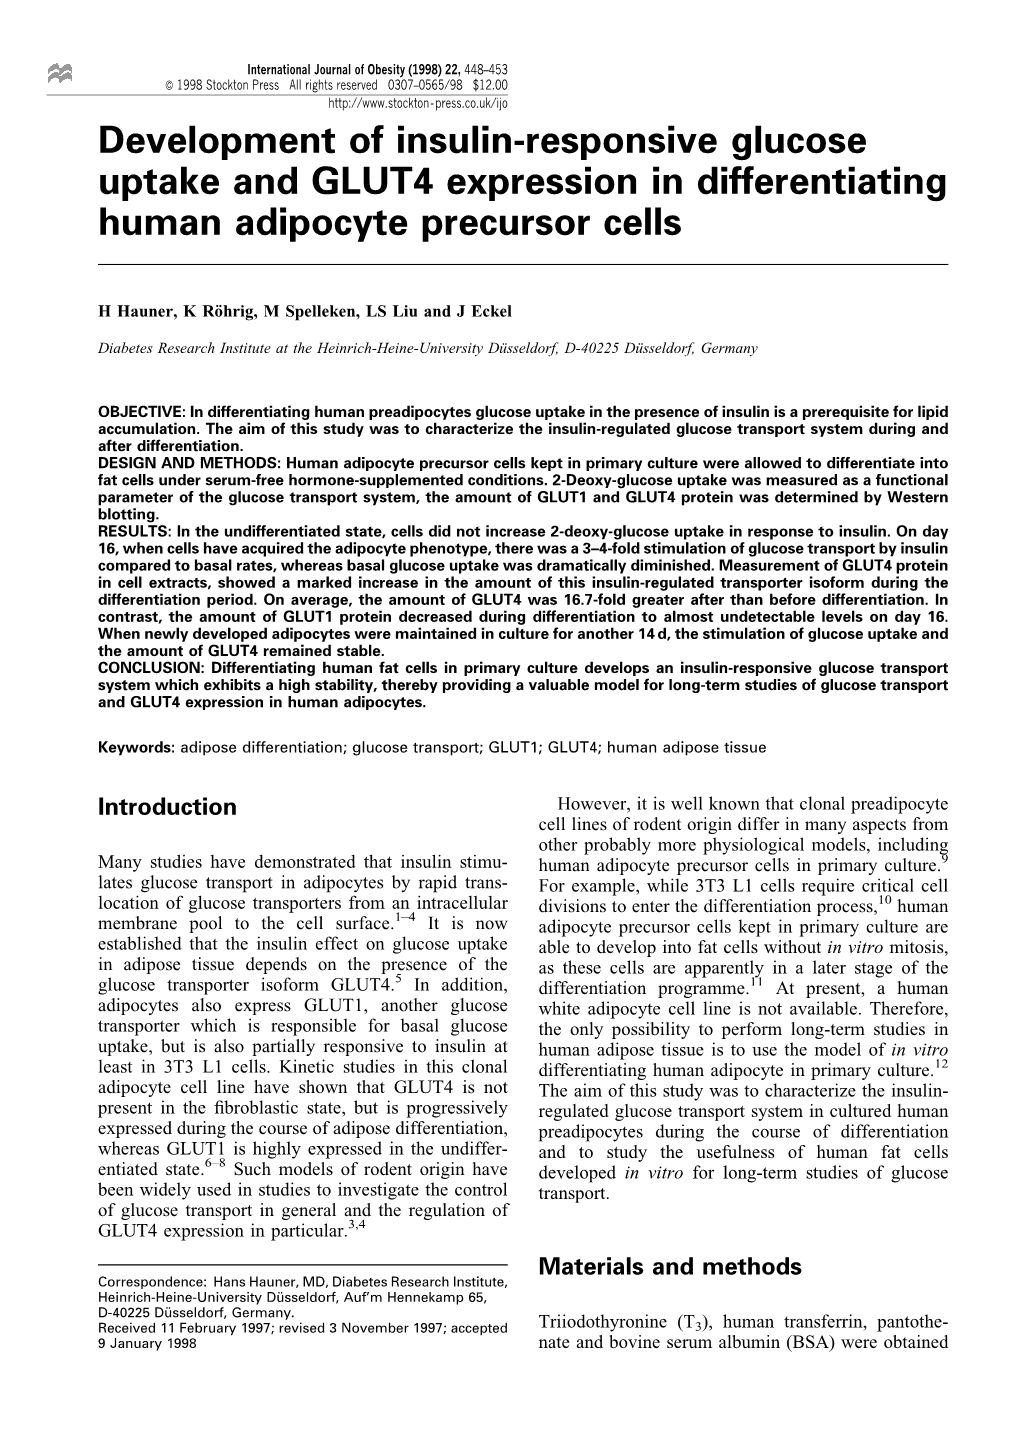 Development of Insulin-Responsive Glucose Uptake and GLUT4 Expression in Differentiating Human Adipocyte Precursor Cells